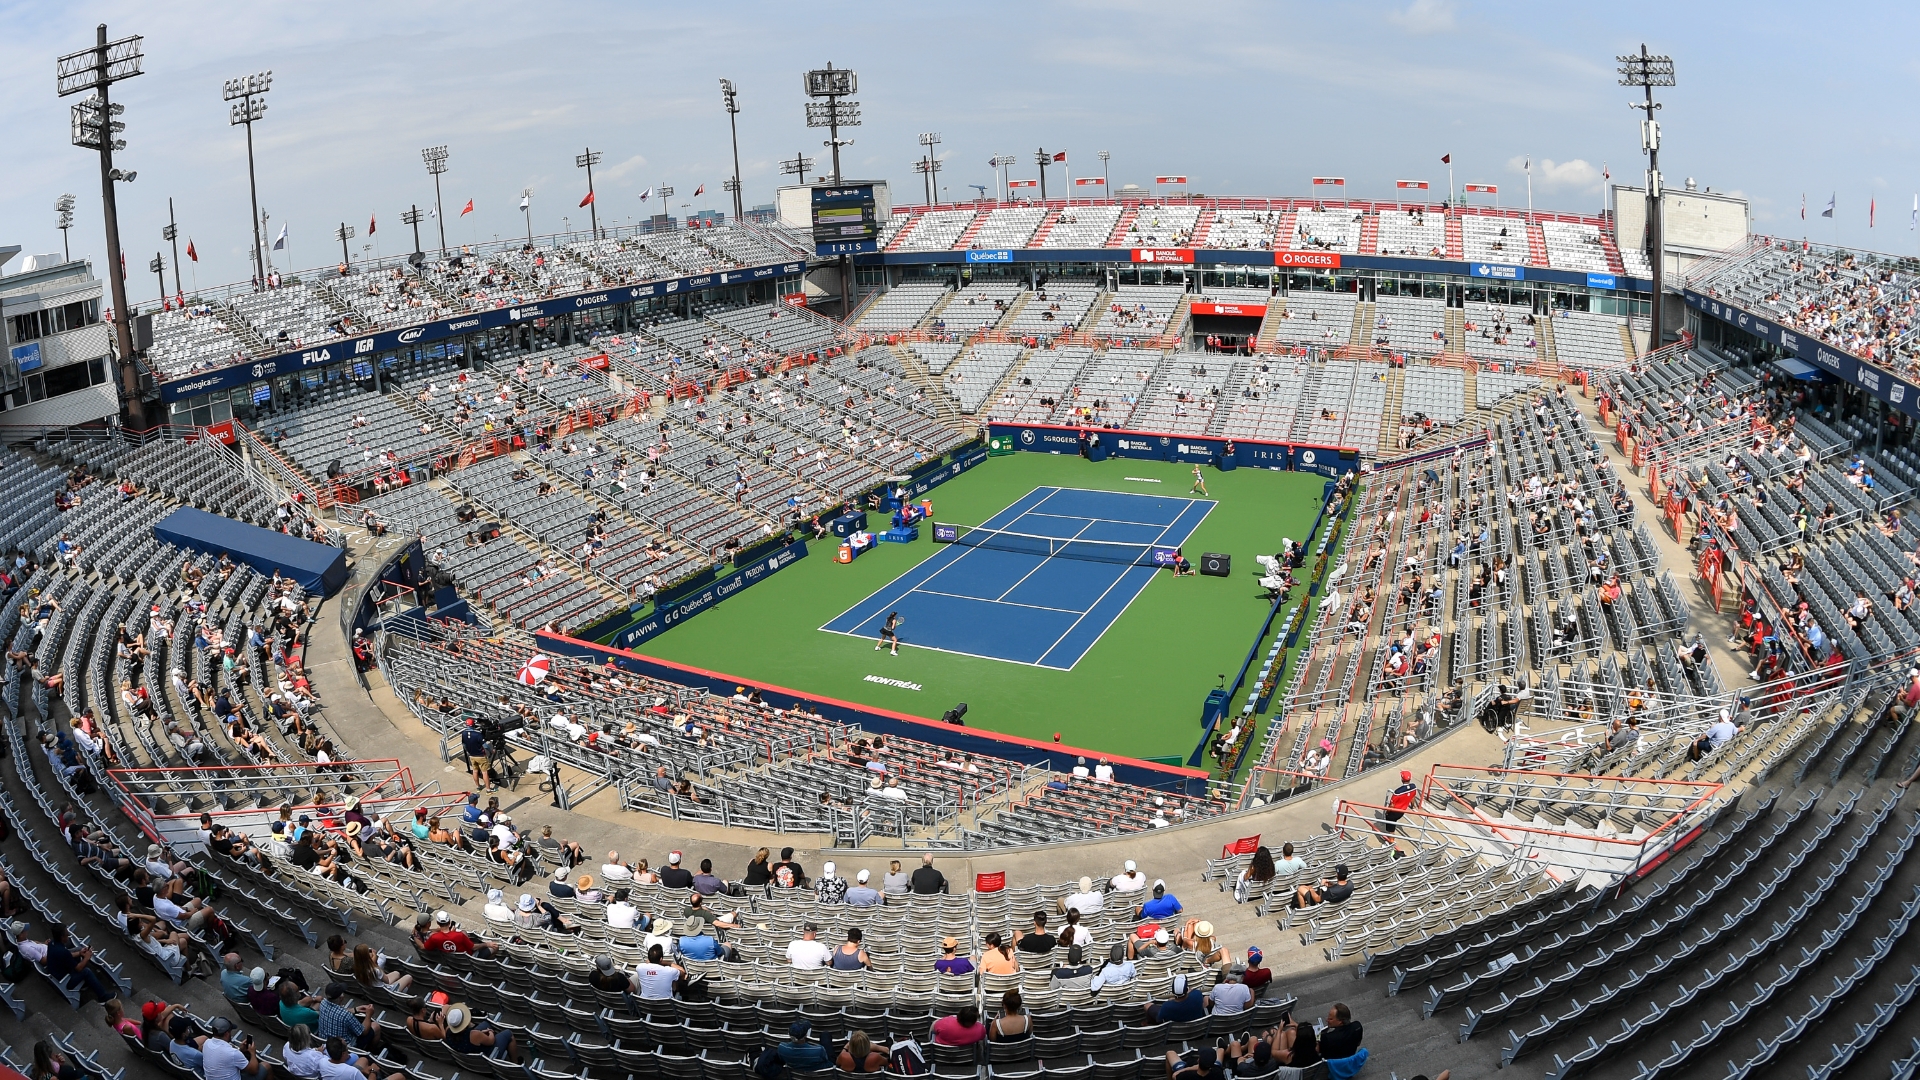 2023 Dubai Duty Free Tennis Championships WTA Prize Money with $2,788,468  on offer